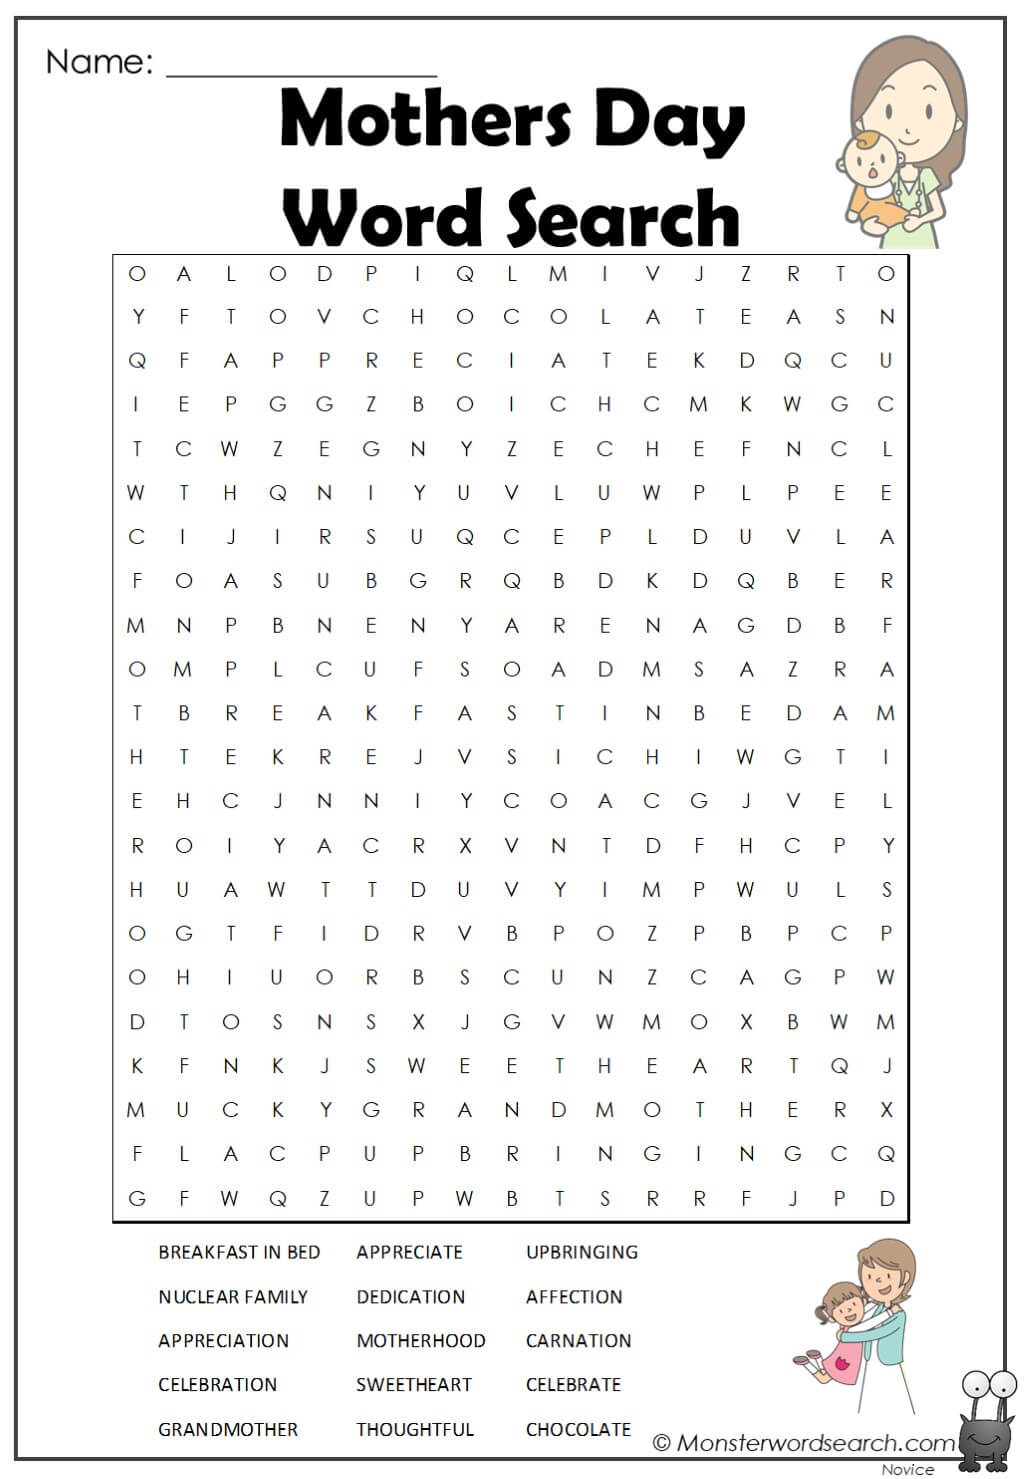 Mothers Day Word Search- Monster Word Search